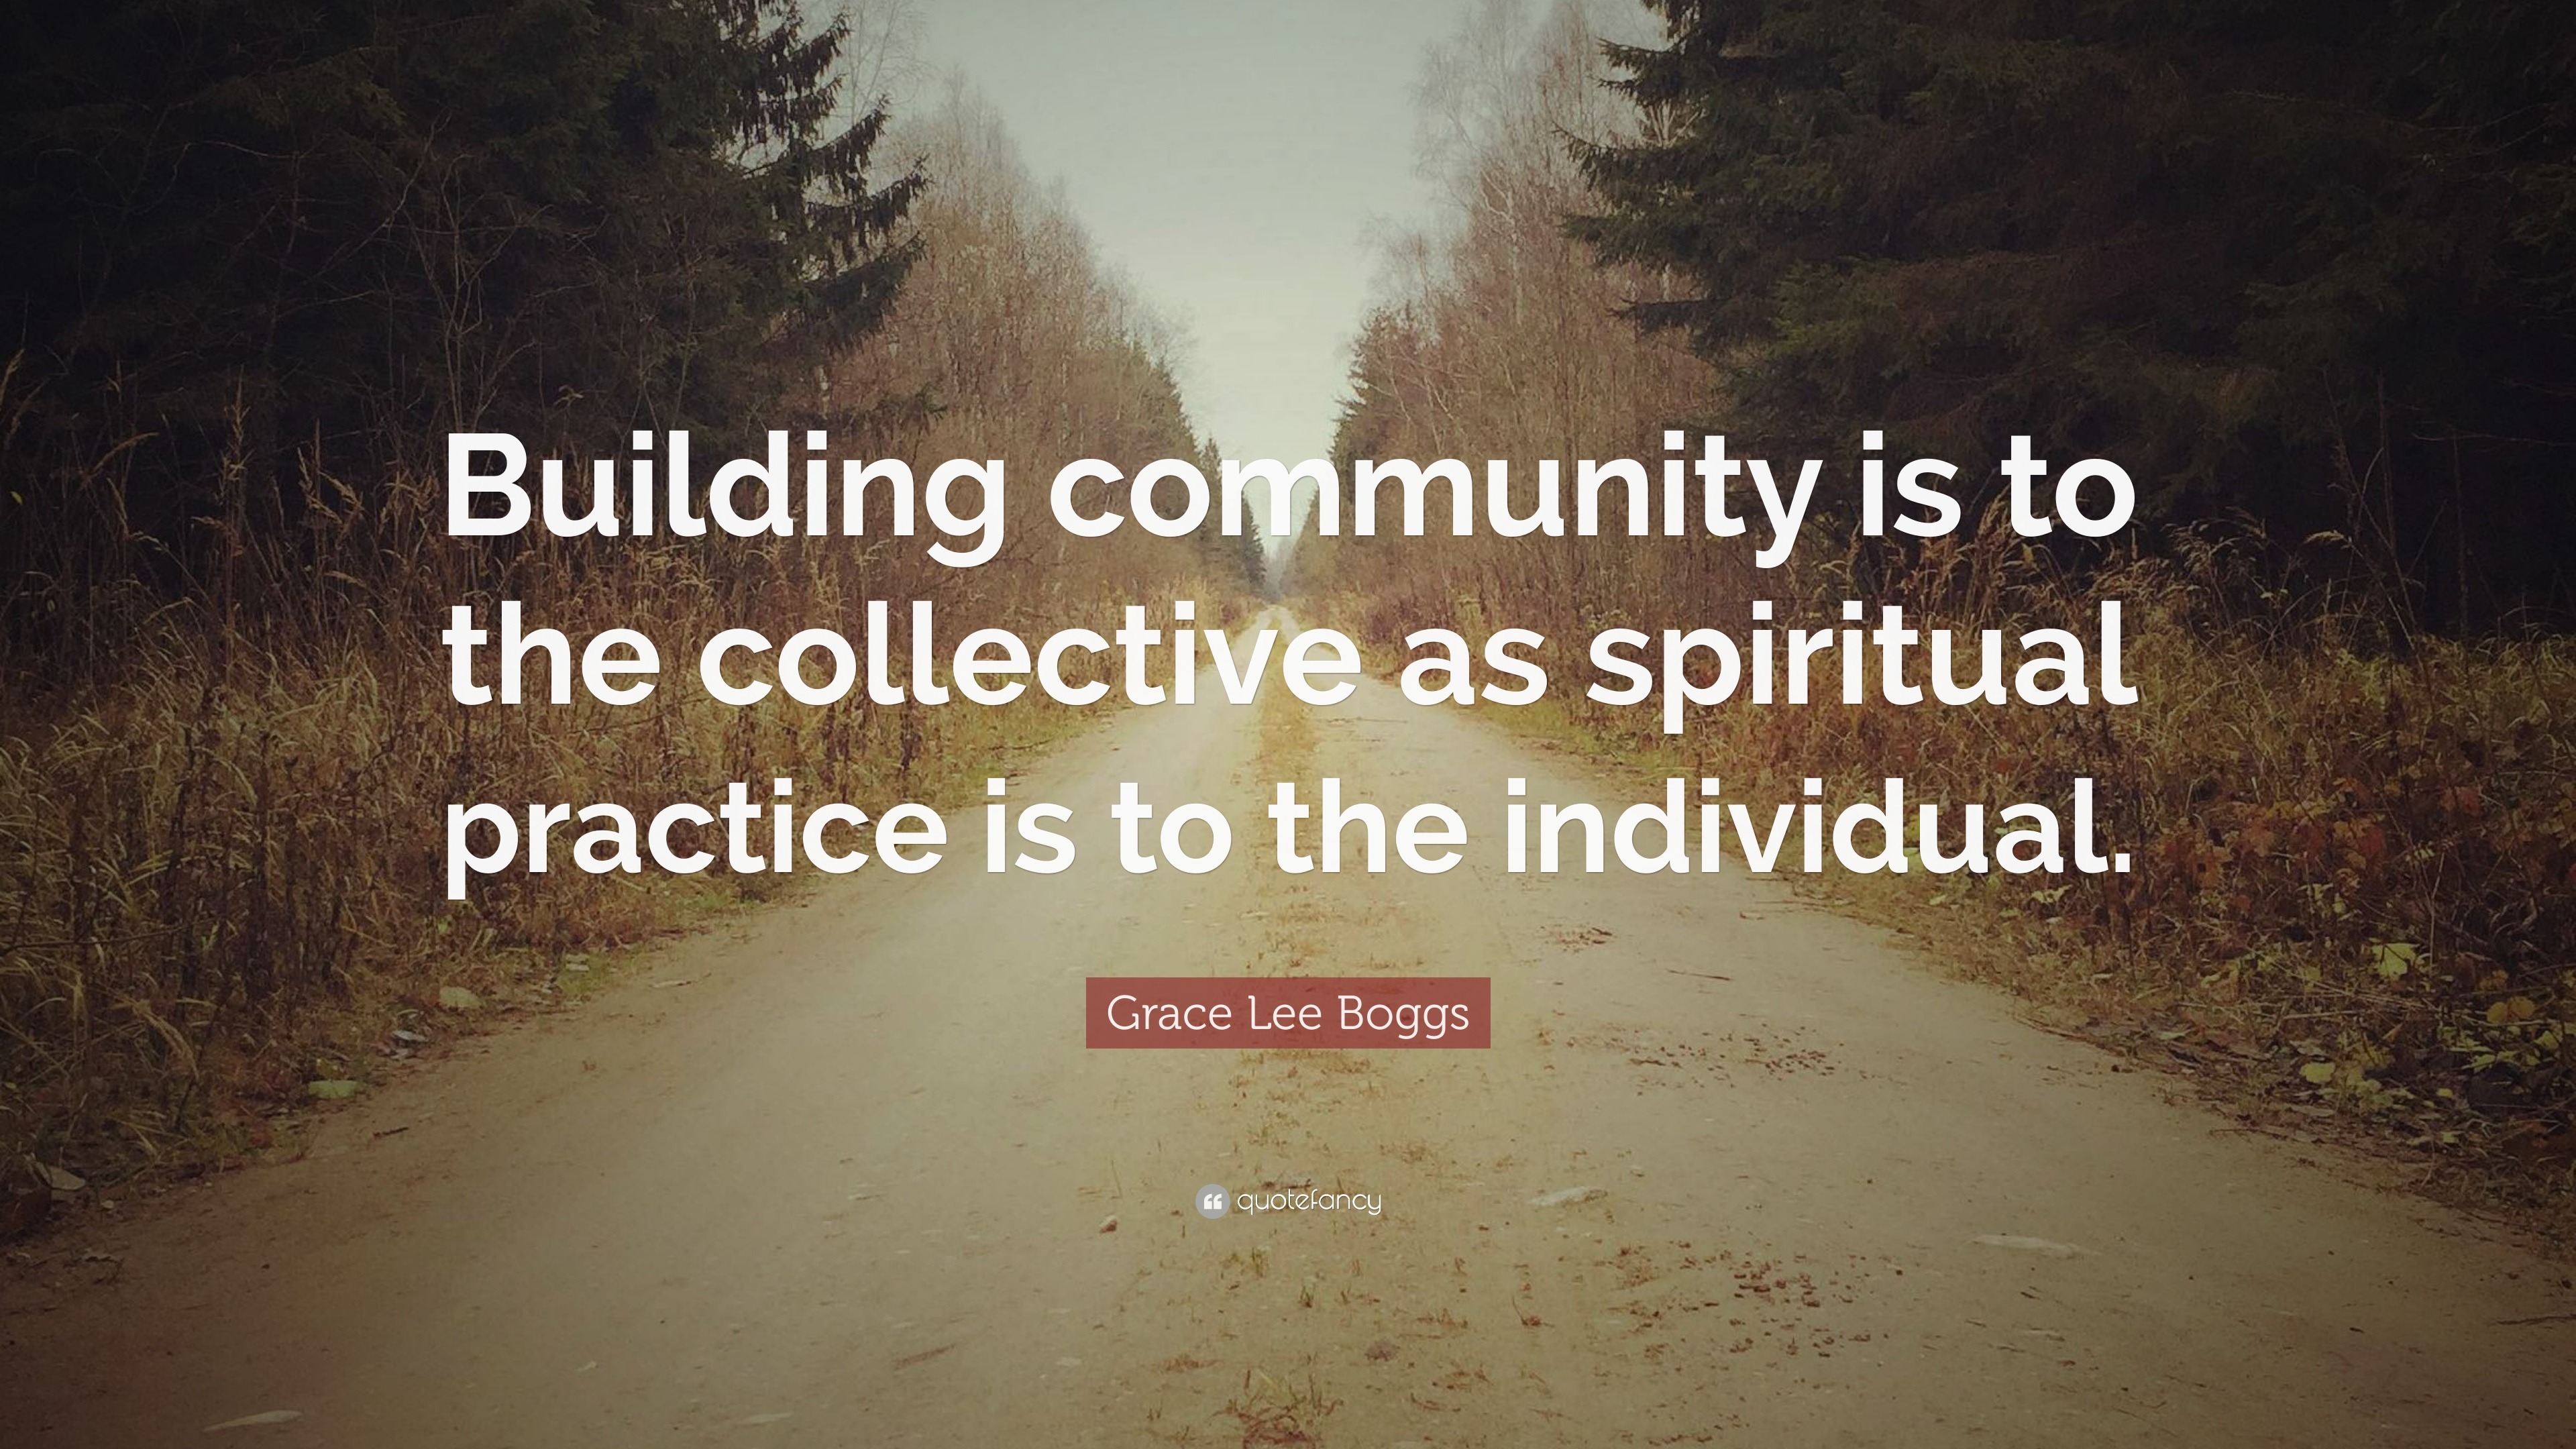 Grace Lee Boggs Quote: “Building community is to the collective as